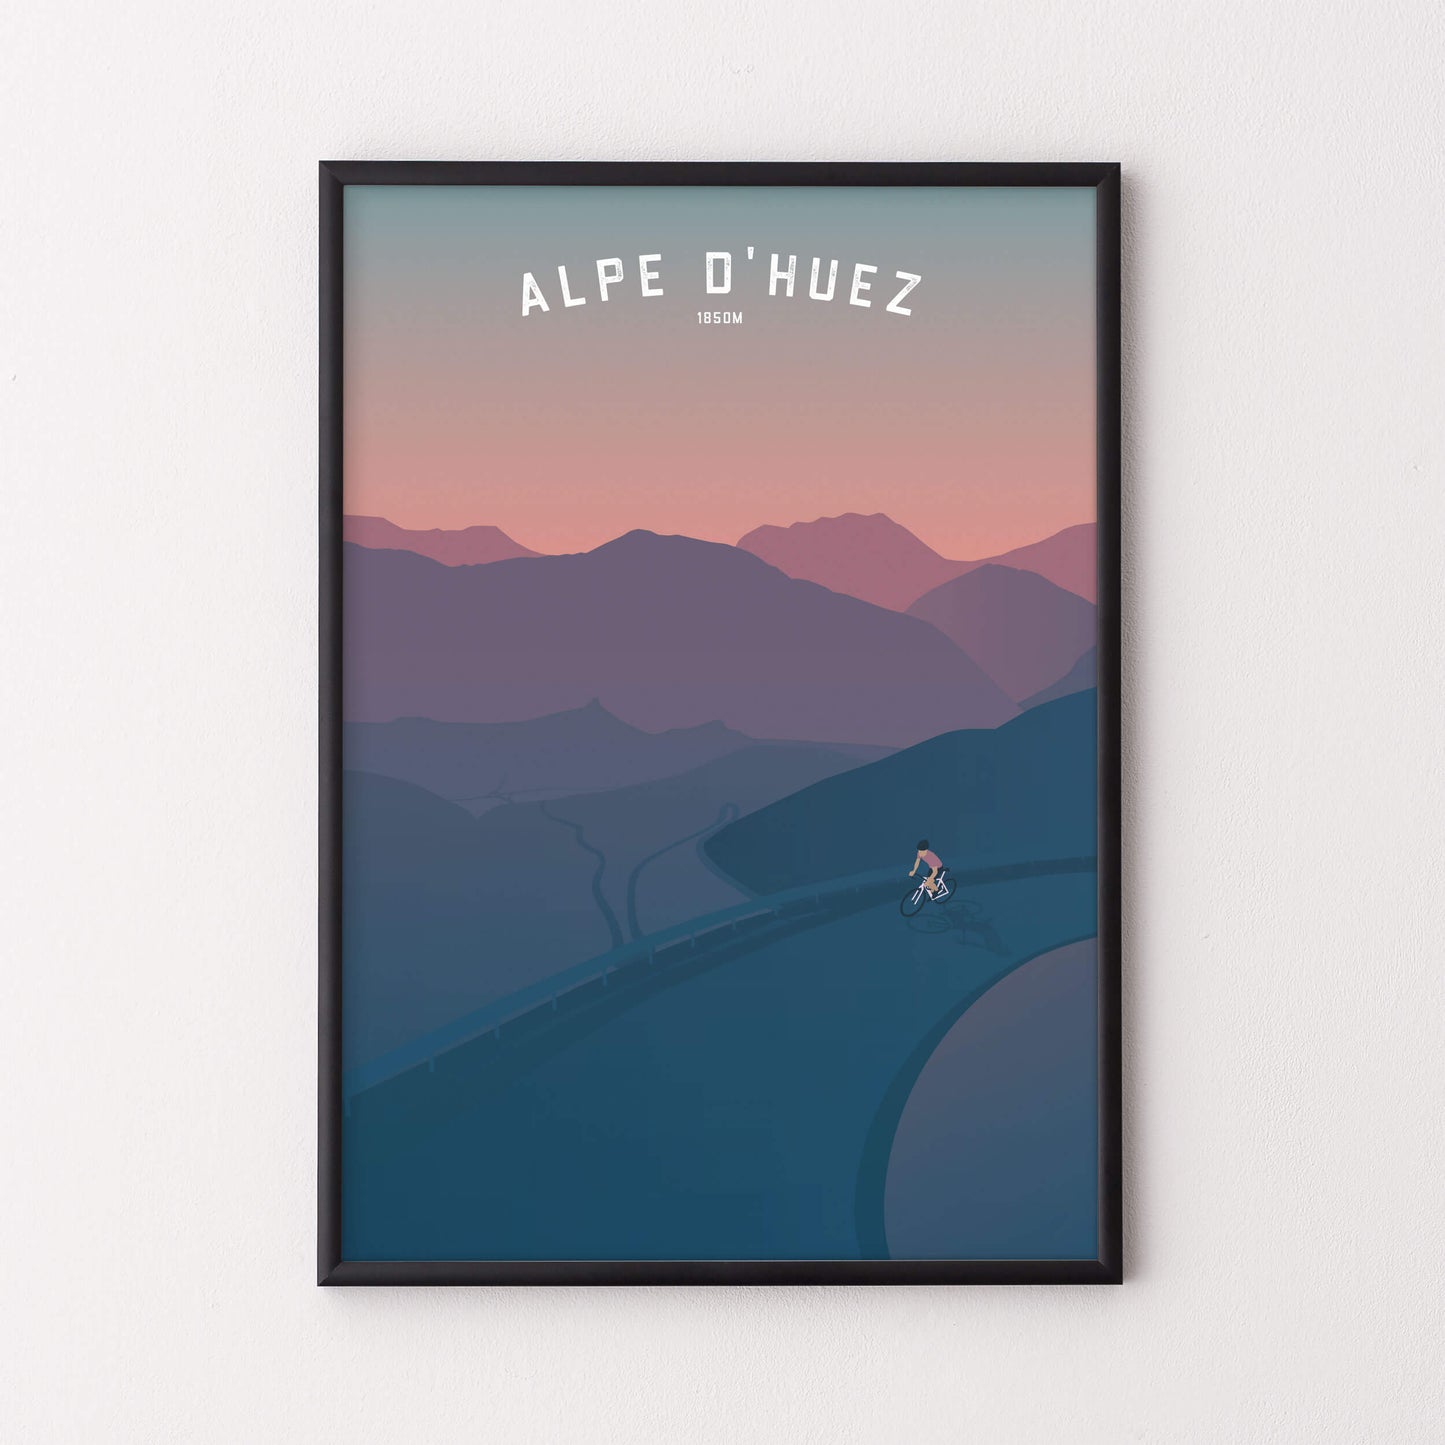 Alpe d'Huez – Poster – The English Cyclist